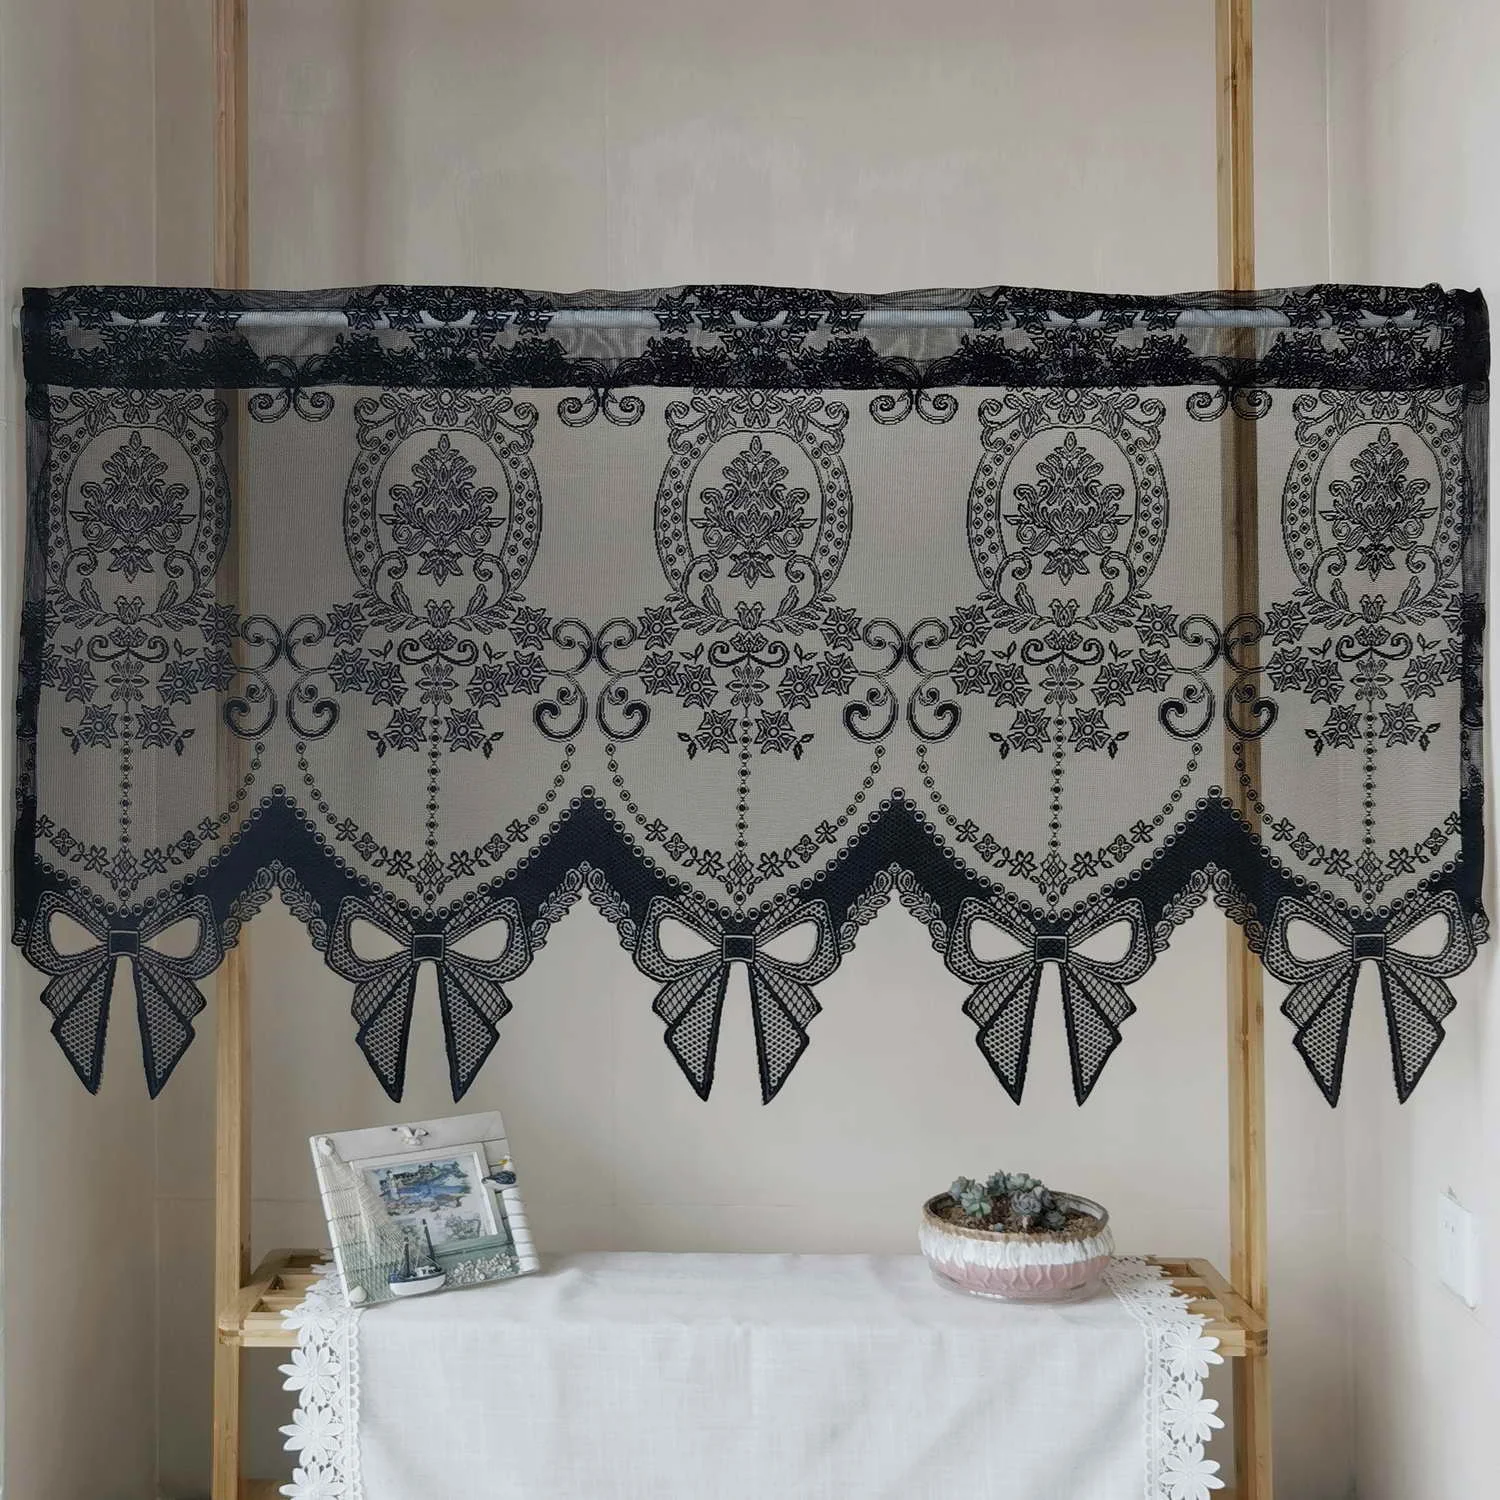 1PC Black Lace Bows Sheer Curtain for Bay Window Voile Drape Cabinet Kitchen Door Cafe Home Decoration #E